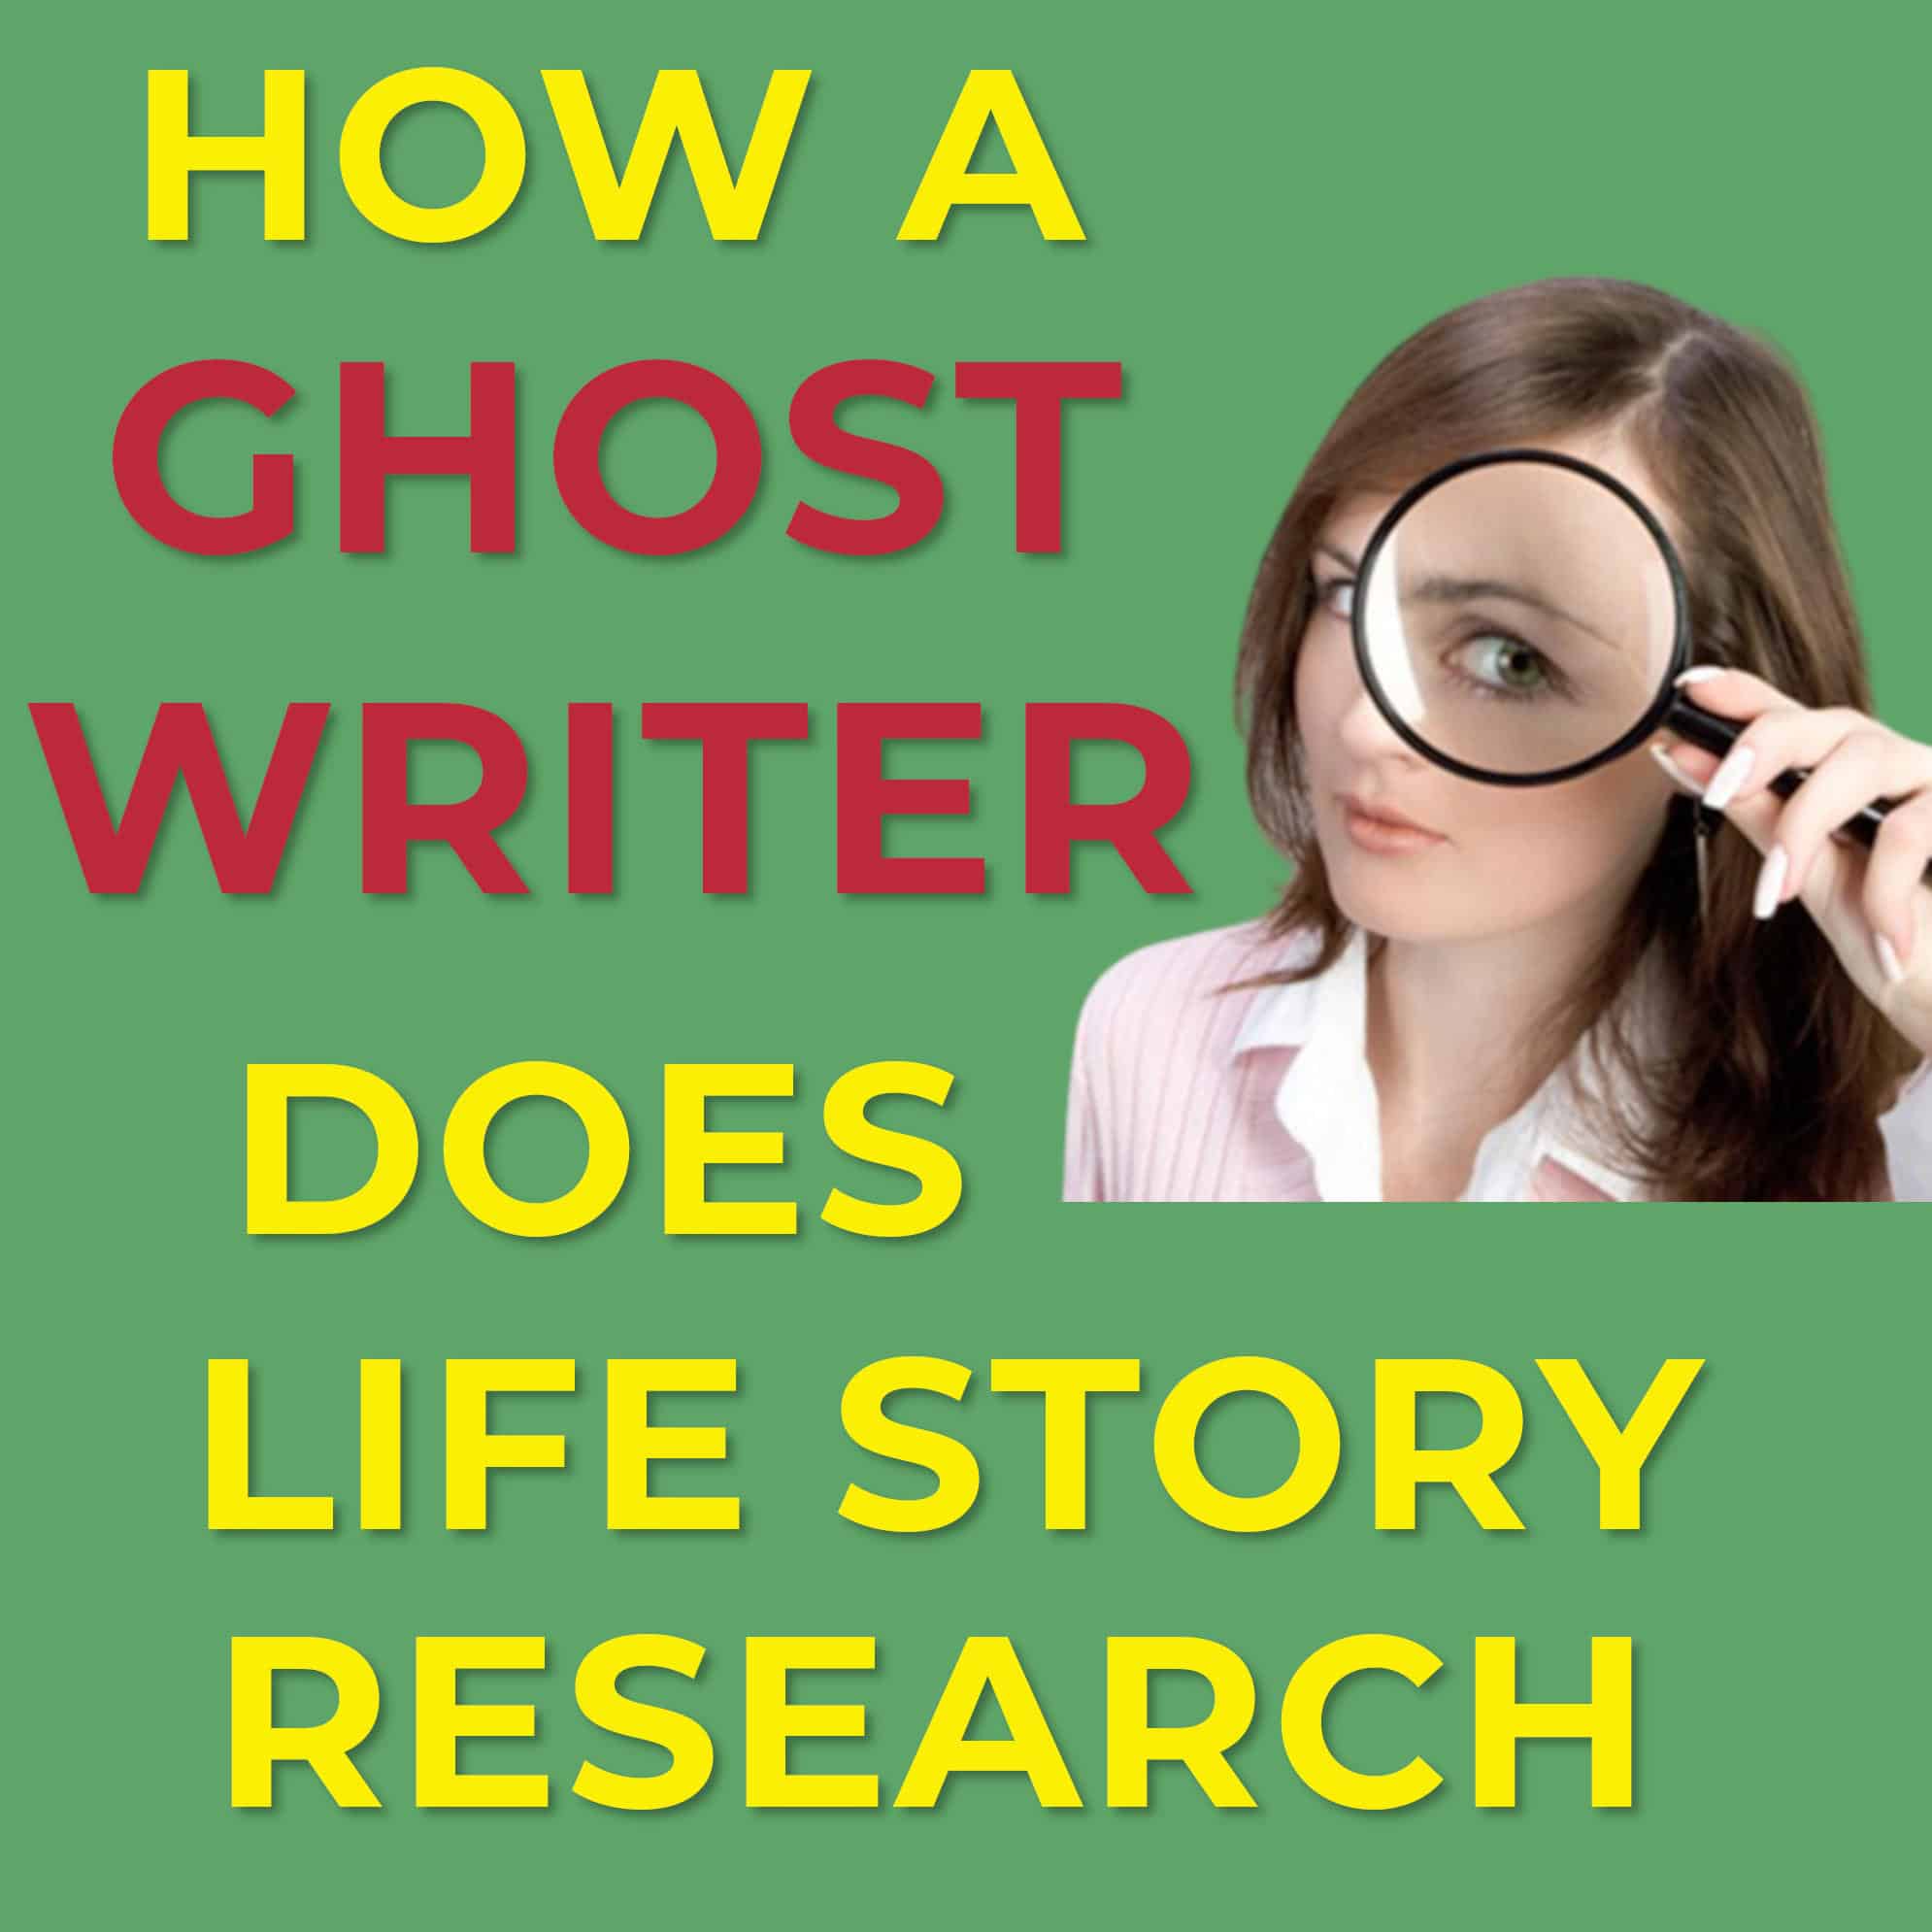 How A Ghostwriter Does Life Story Research Blog Header